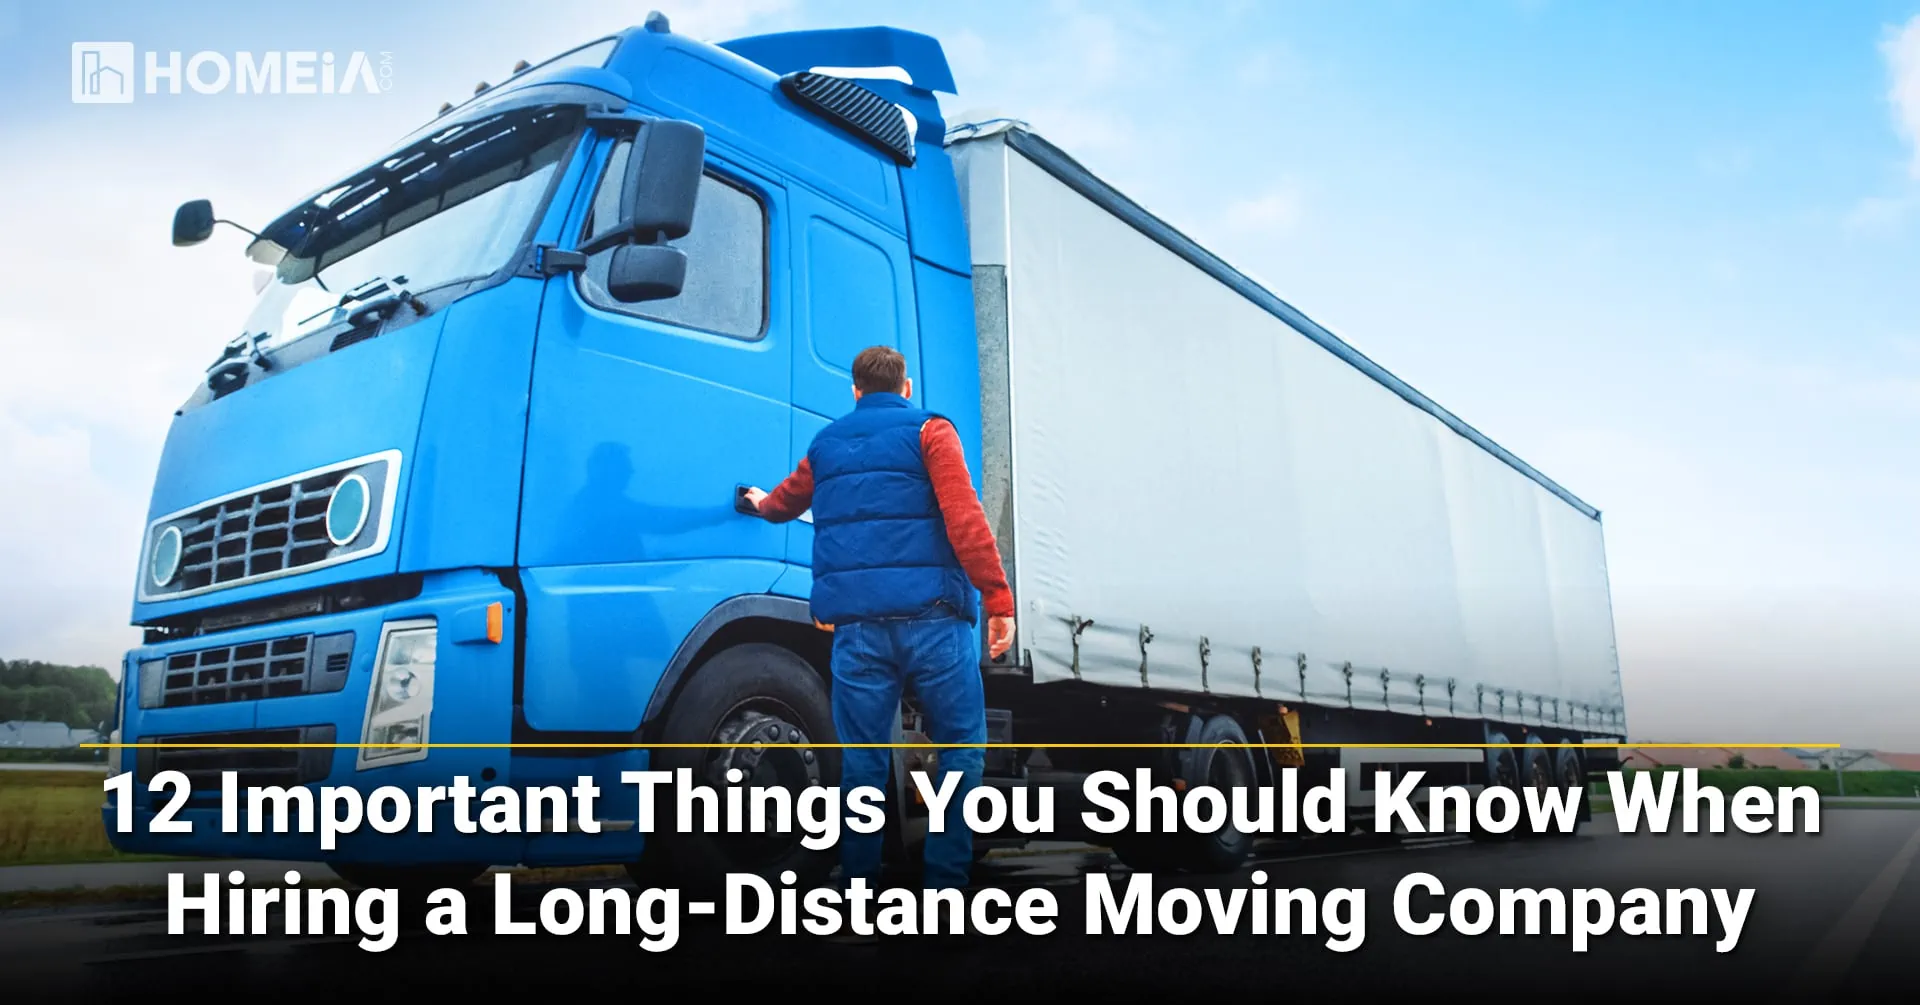 12 Important Things You Should Know When Hiring a Long-Distance Moving Company